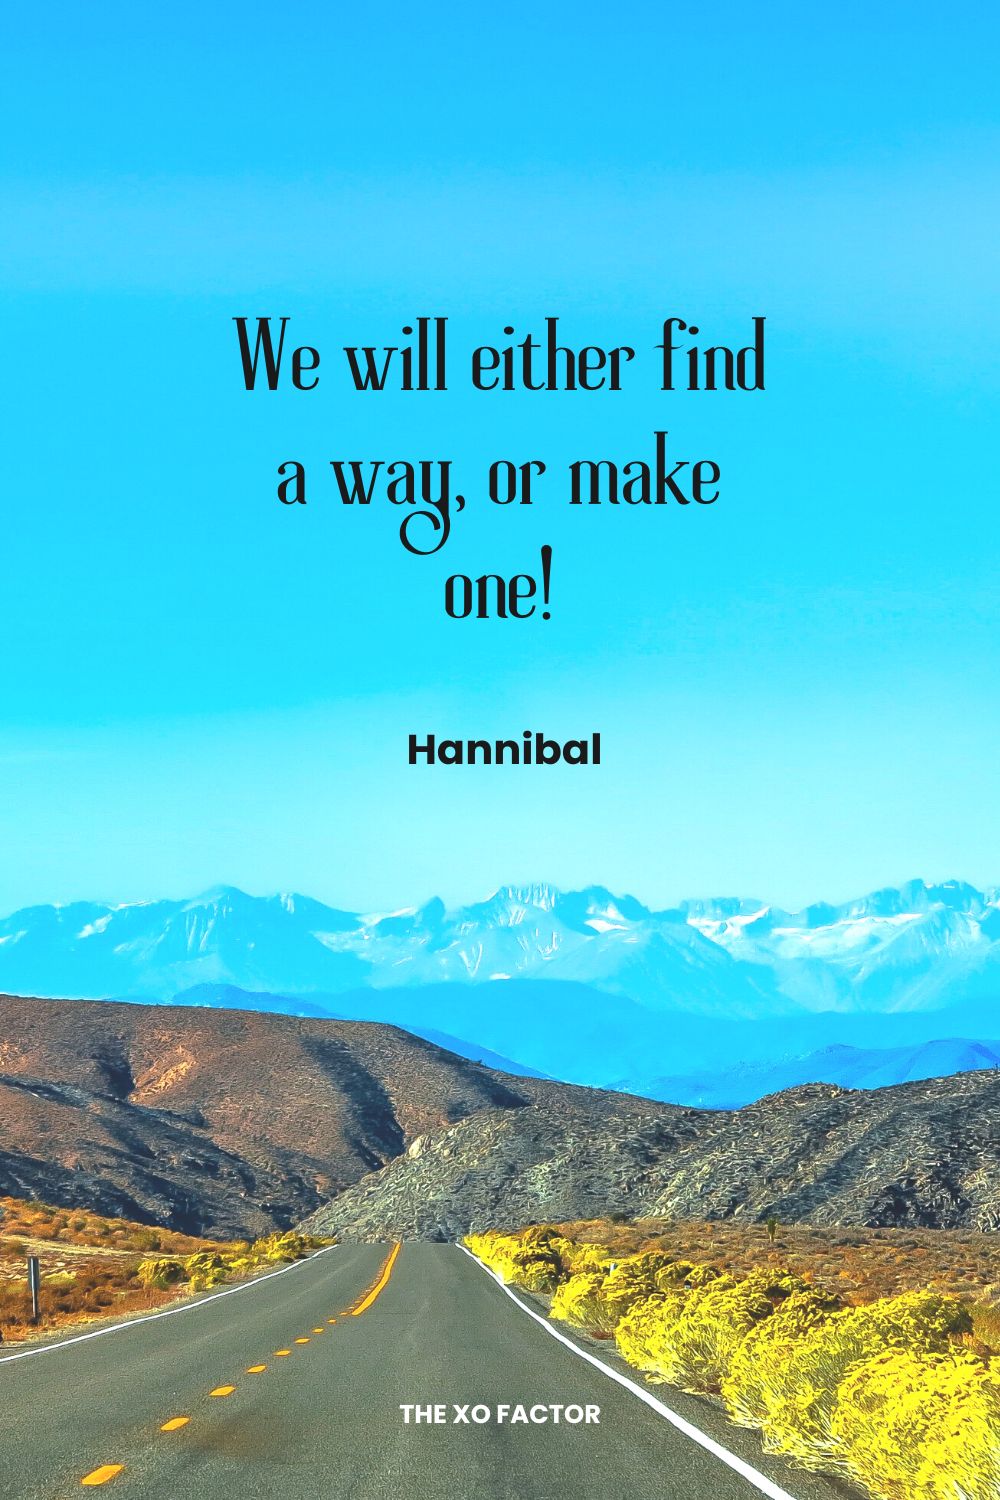 We will either find a way, or make one!  Hannibal